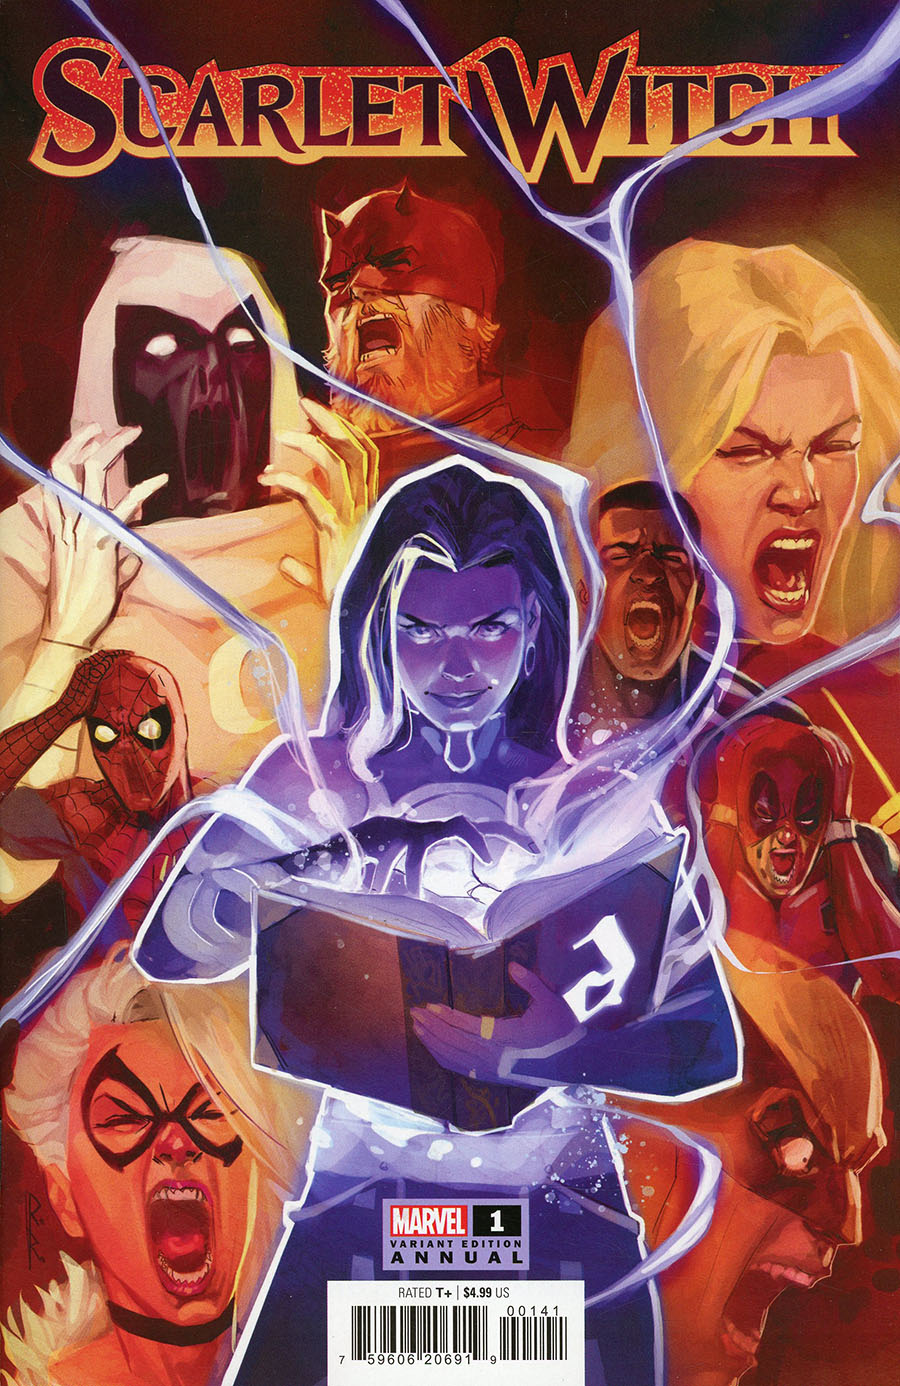 Scarlet Witch Vol 3 Annual #1 Cover D Variant Rod Reis Spoiler Cover (Contest Of Chaos Tie-In)